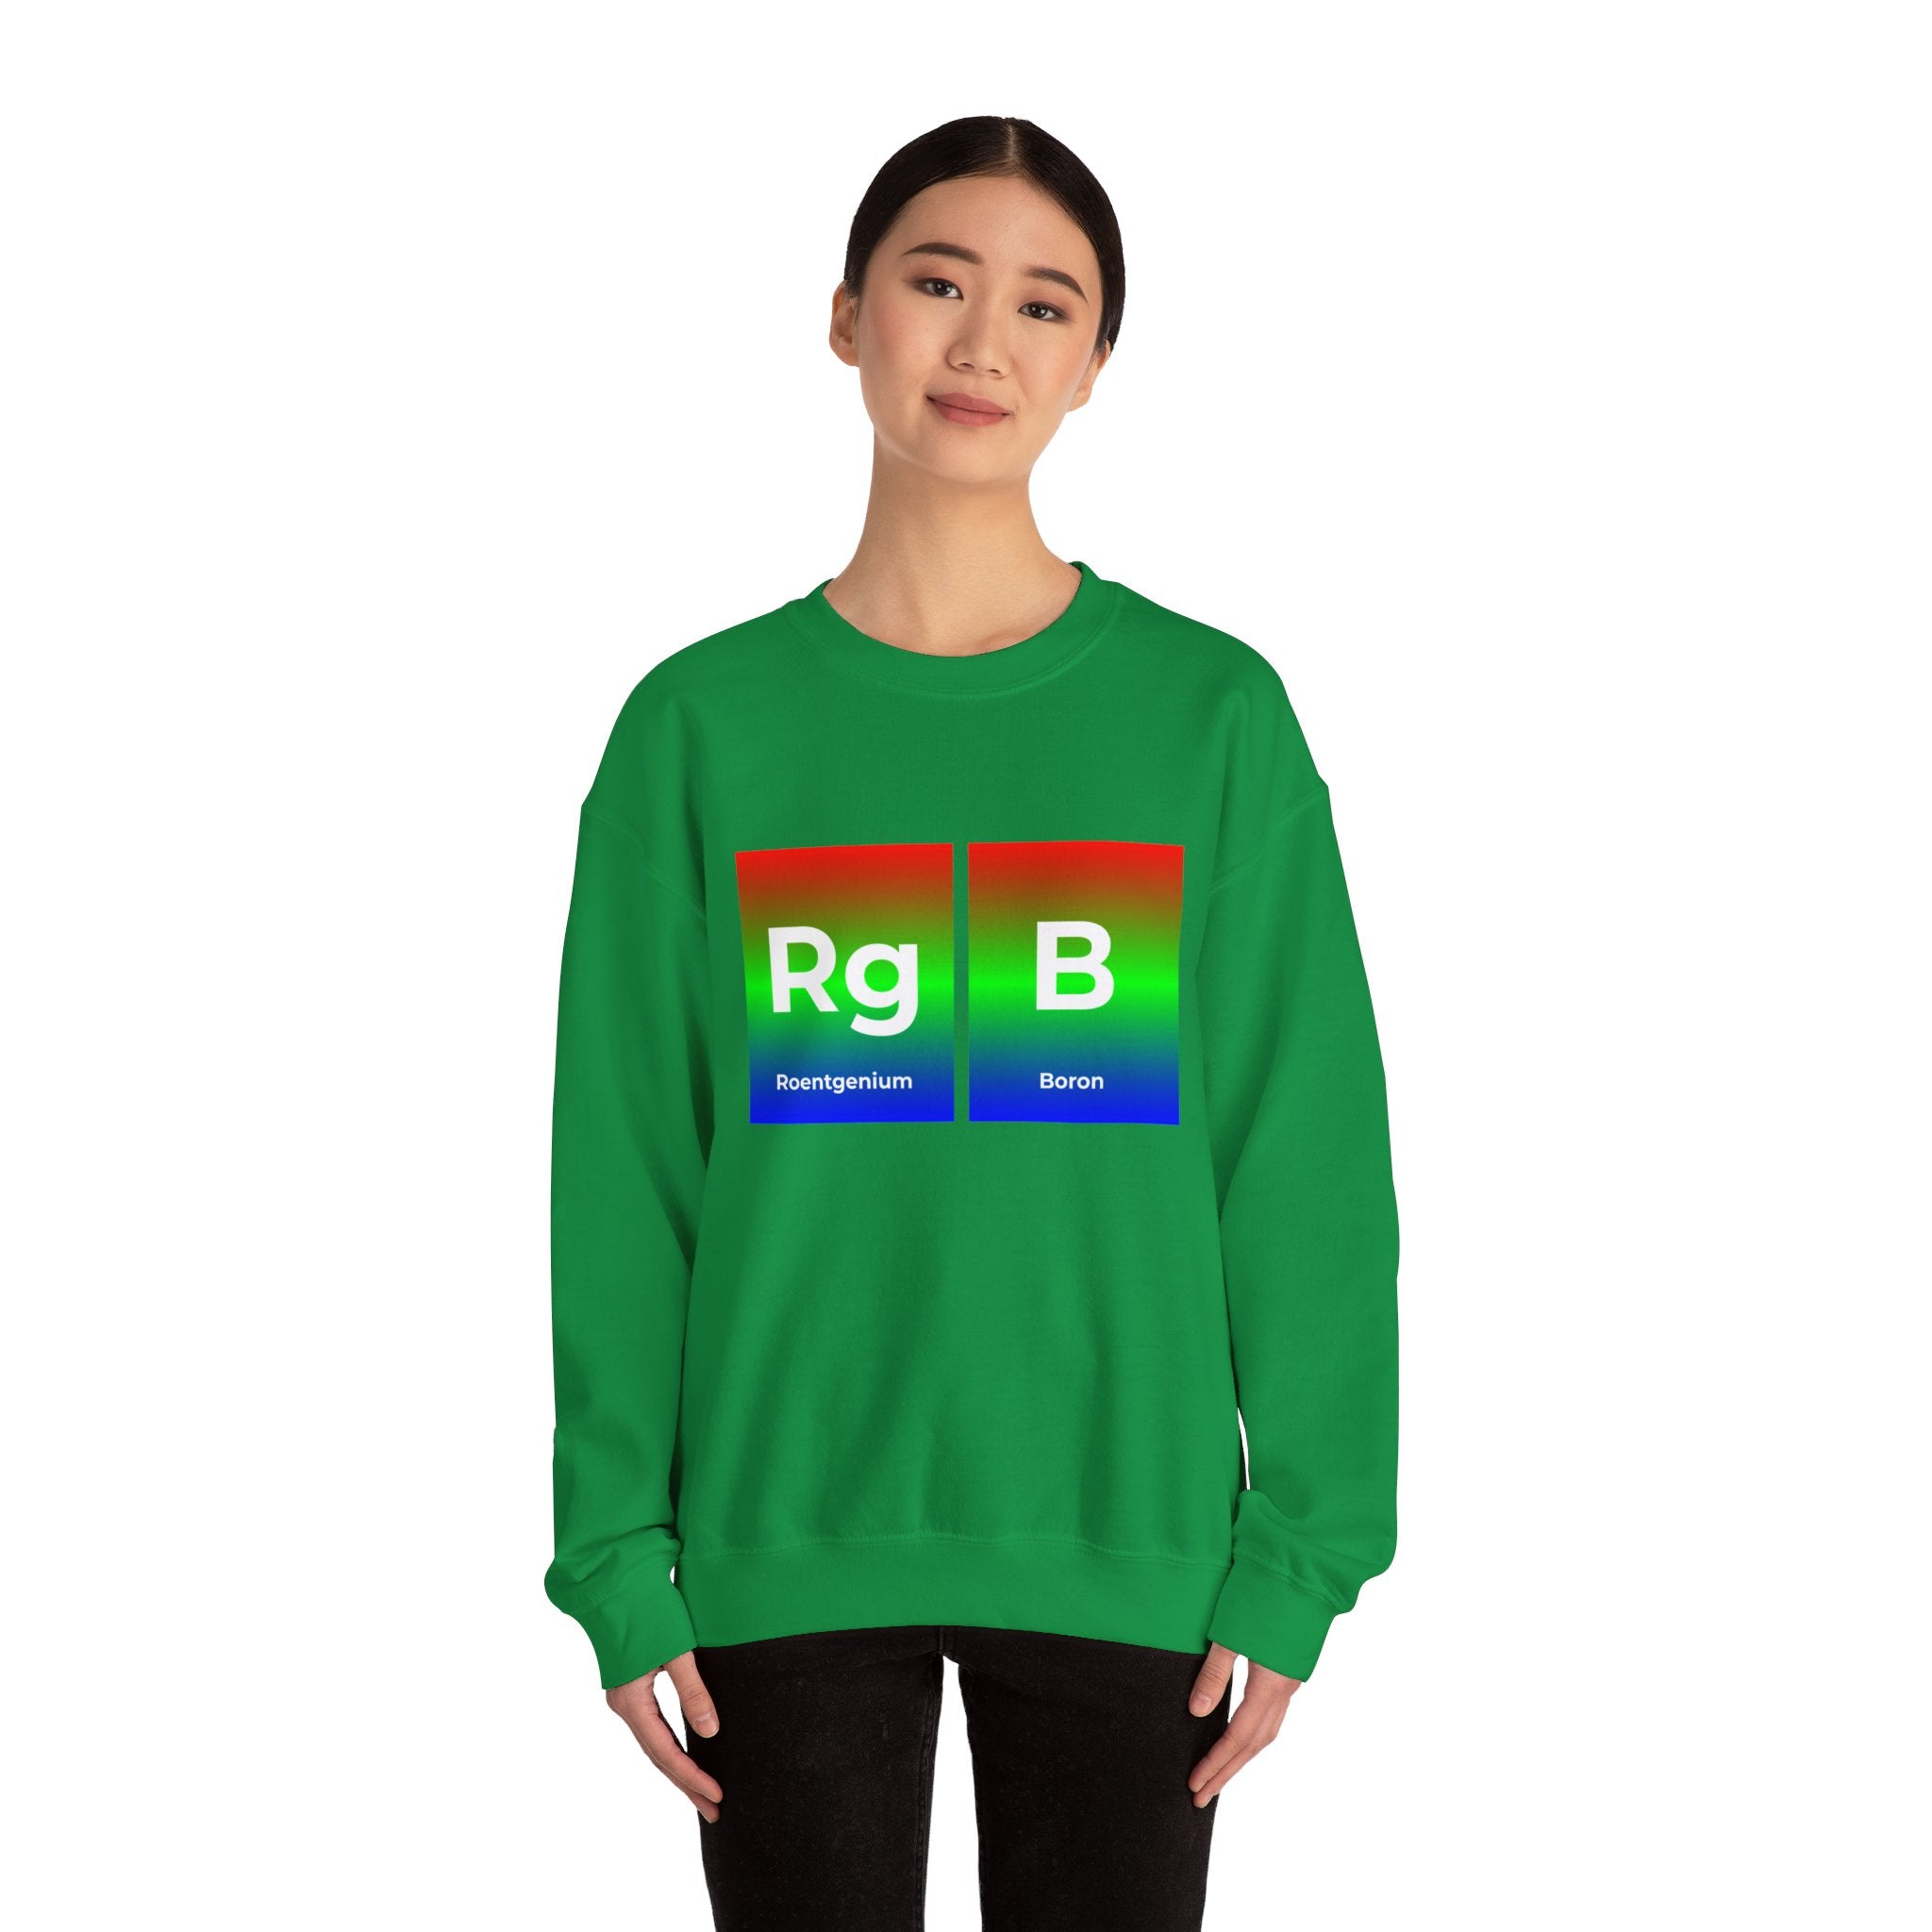 Woman wearing a cozy, stylish green RG-B - Sweatshirt, featuring stylized periodic table elements for Roentgenium (Rg) and Boron (B) on the front.